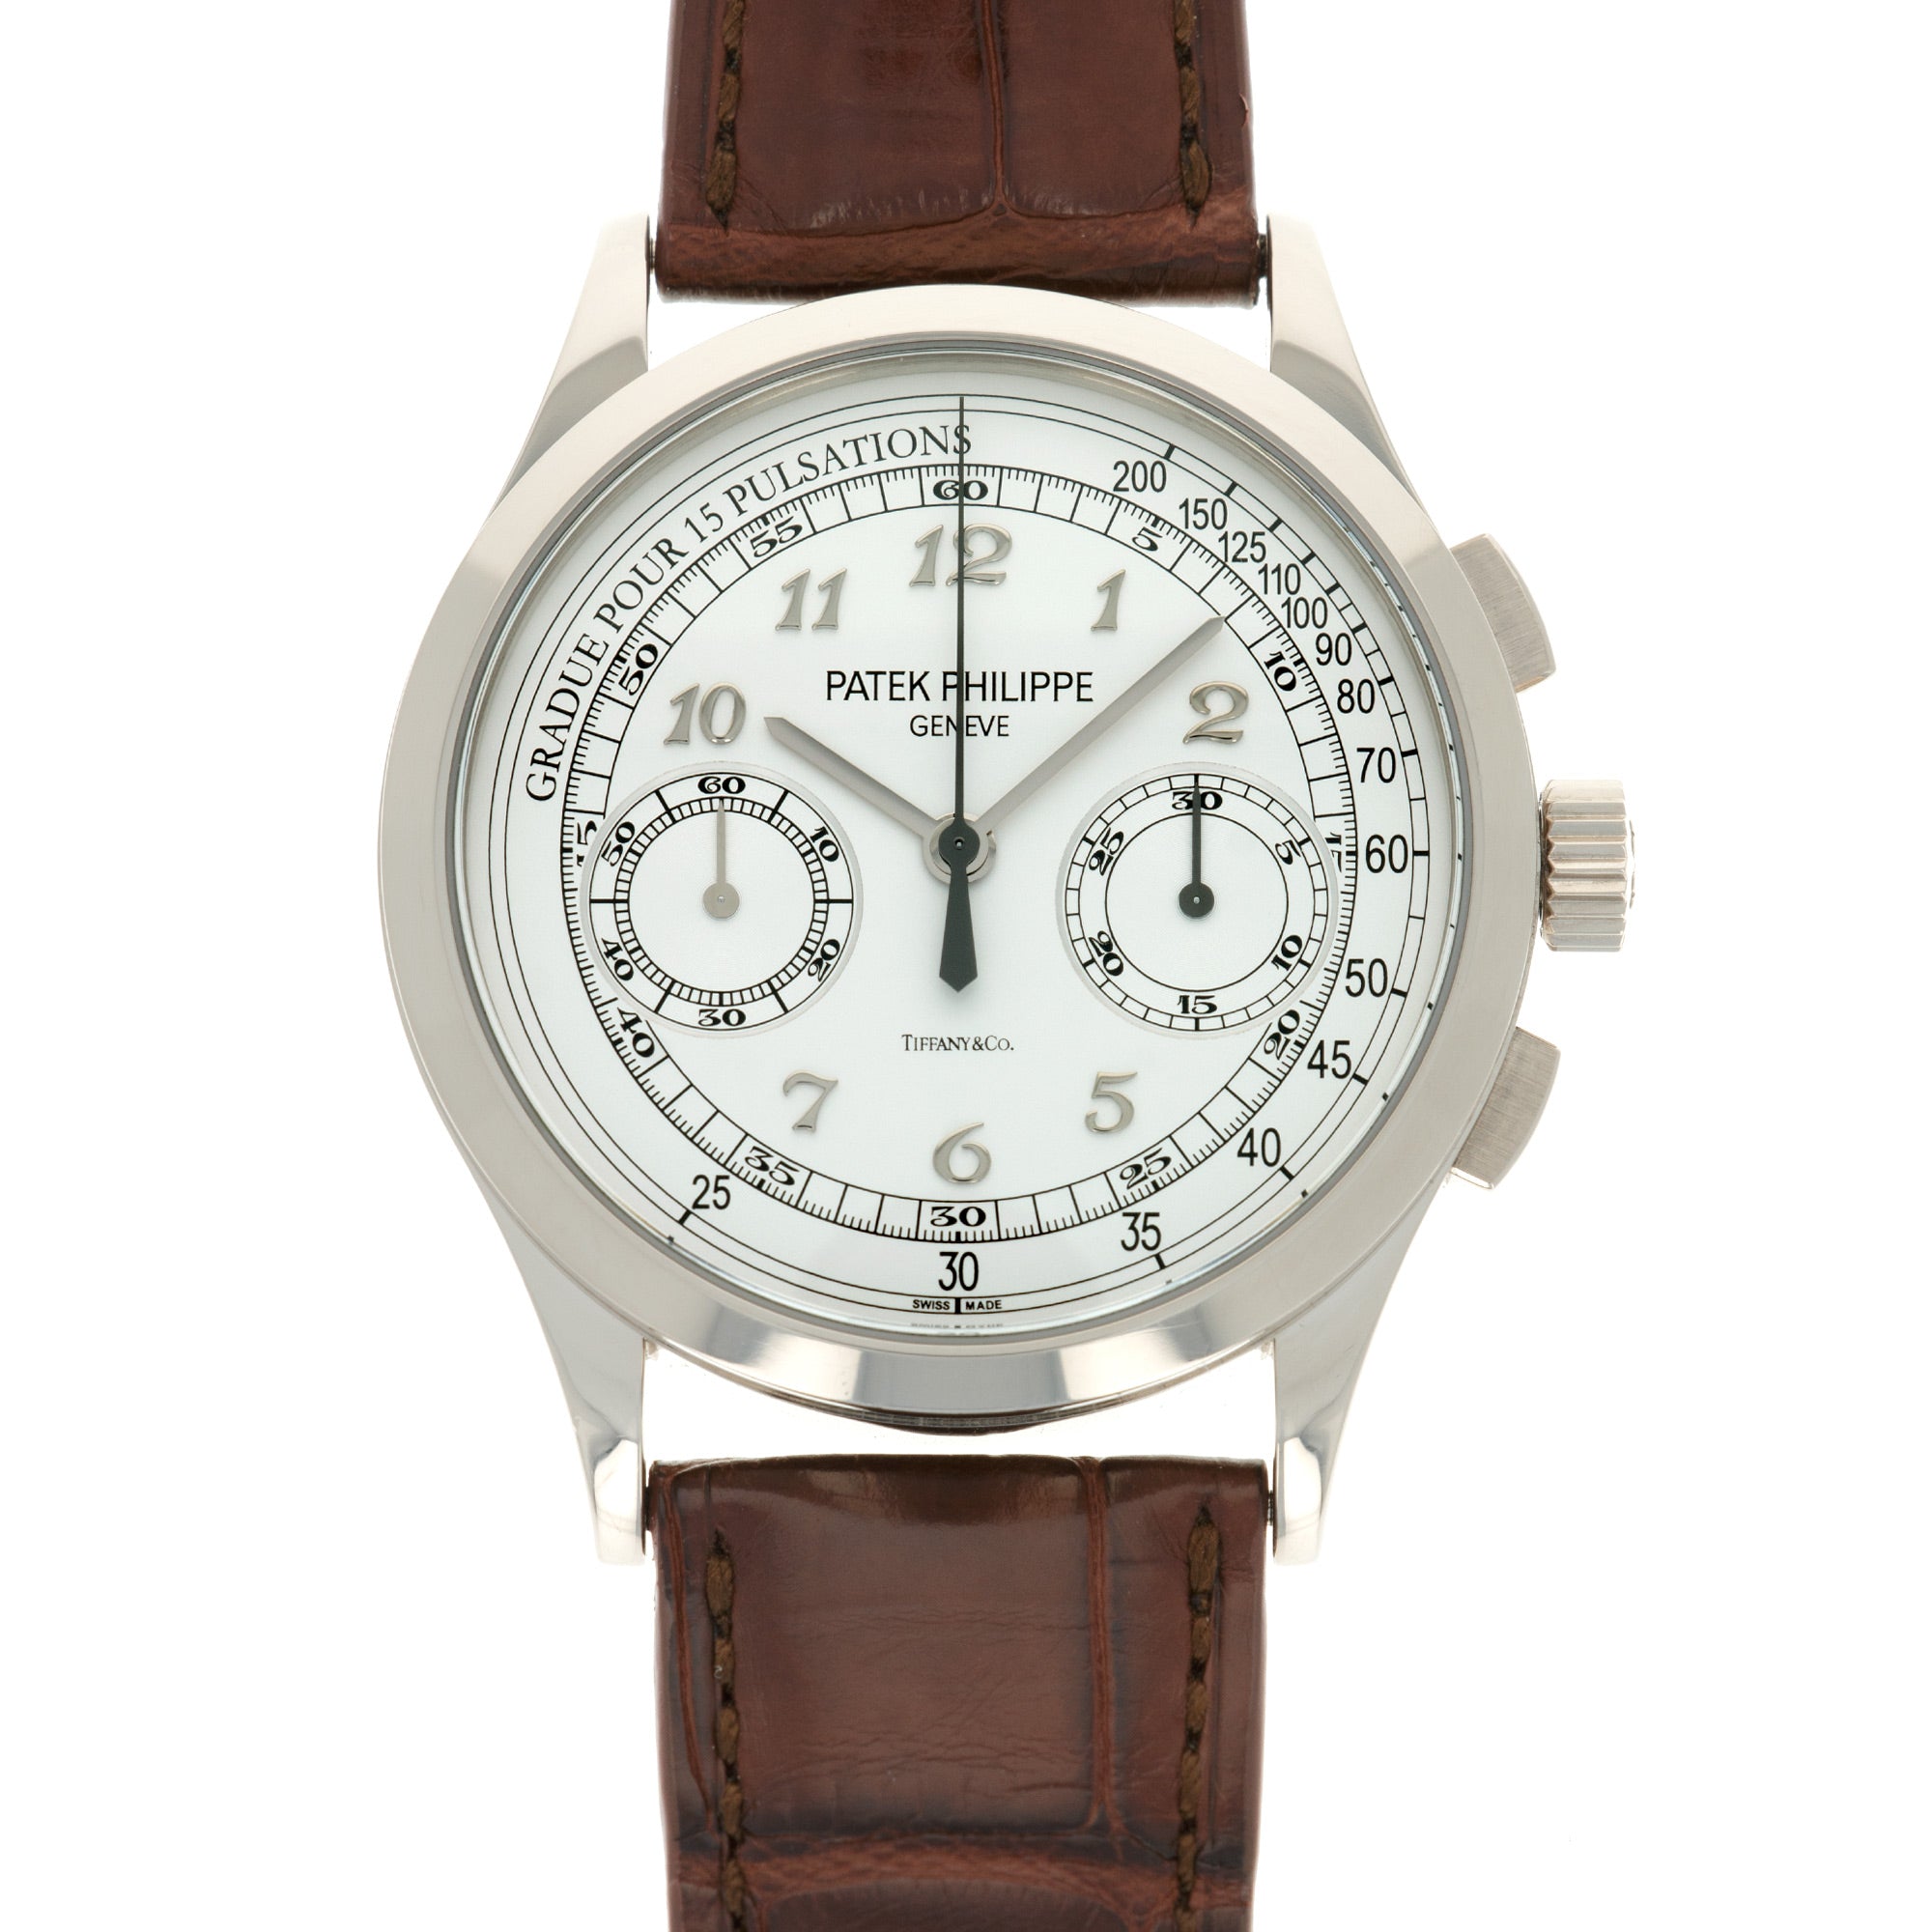 Patek Philippe - Patek Philippe White Gold Chronograph Ref. 5170, Retailed by Tiffany &amp; Co. - The Keystone Watches